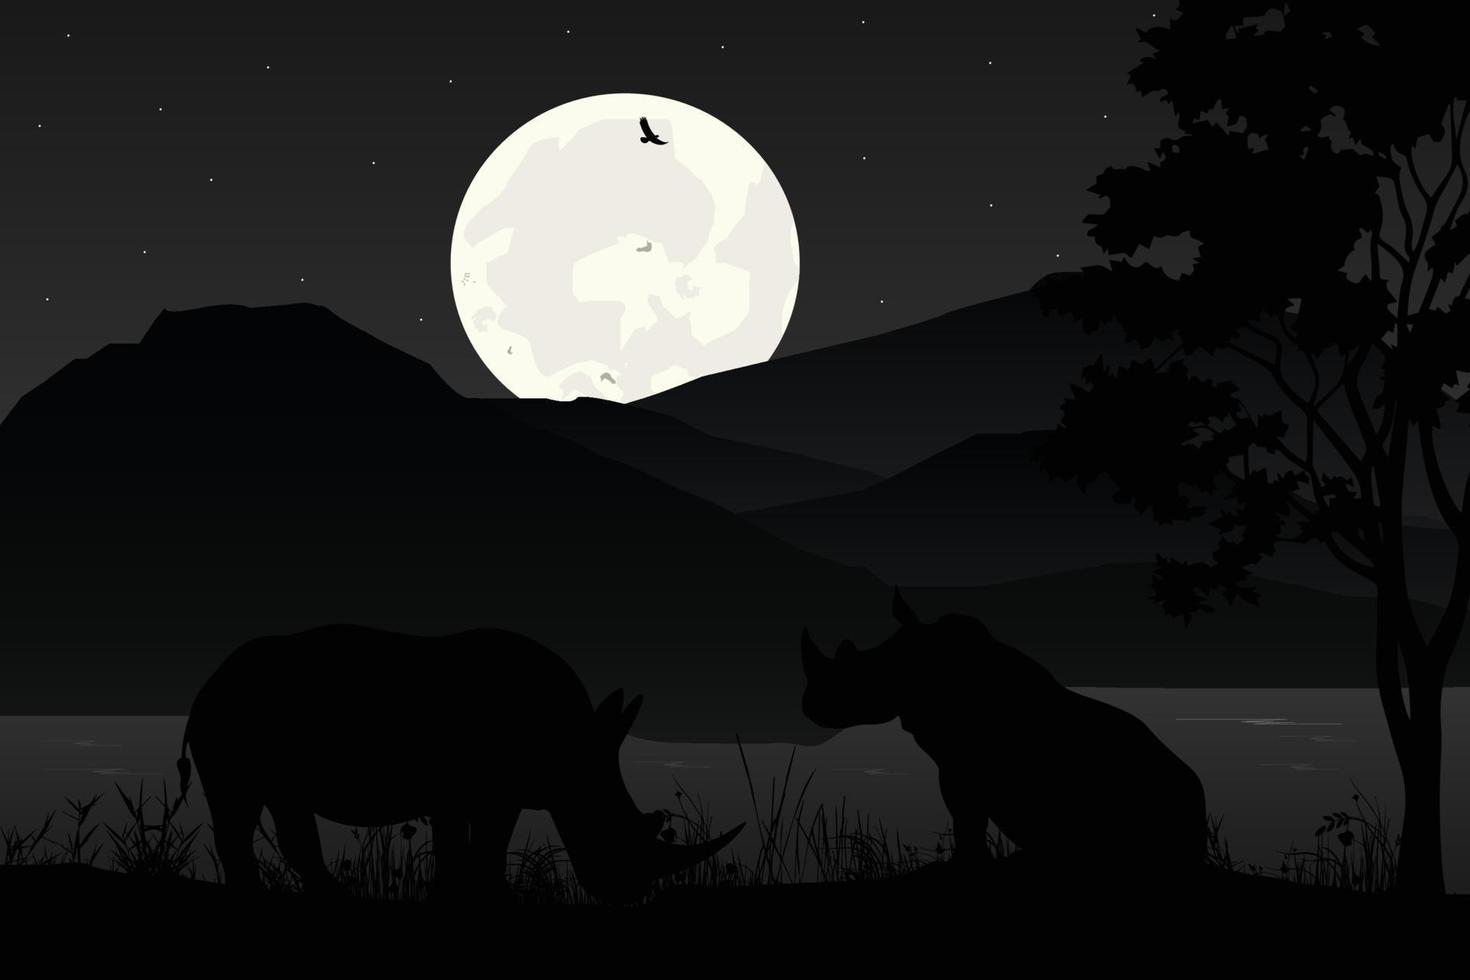 cute rhino and moon silhouette graphic vector